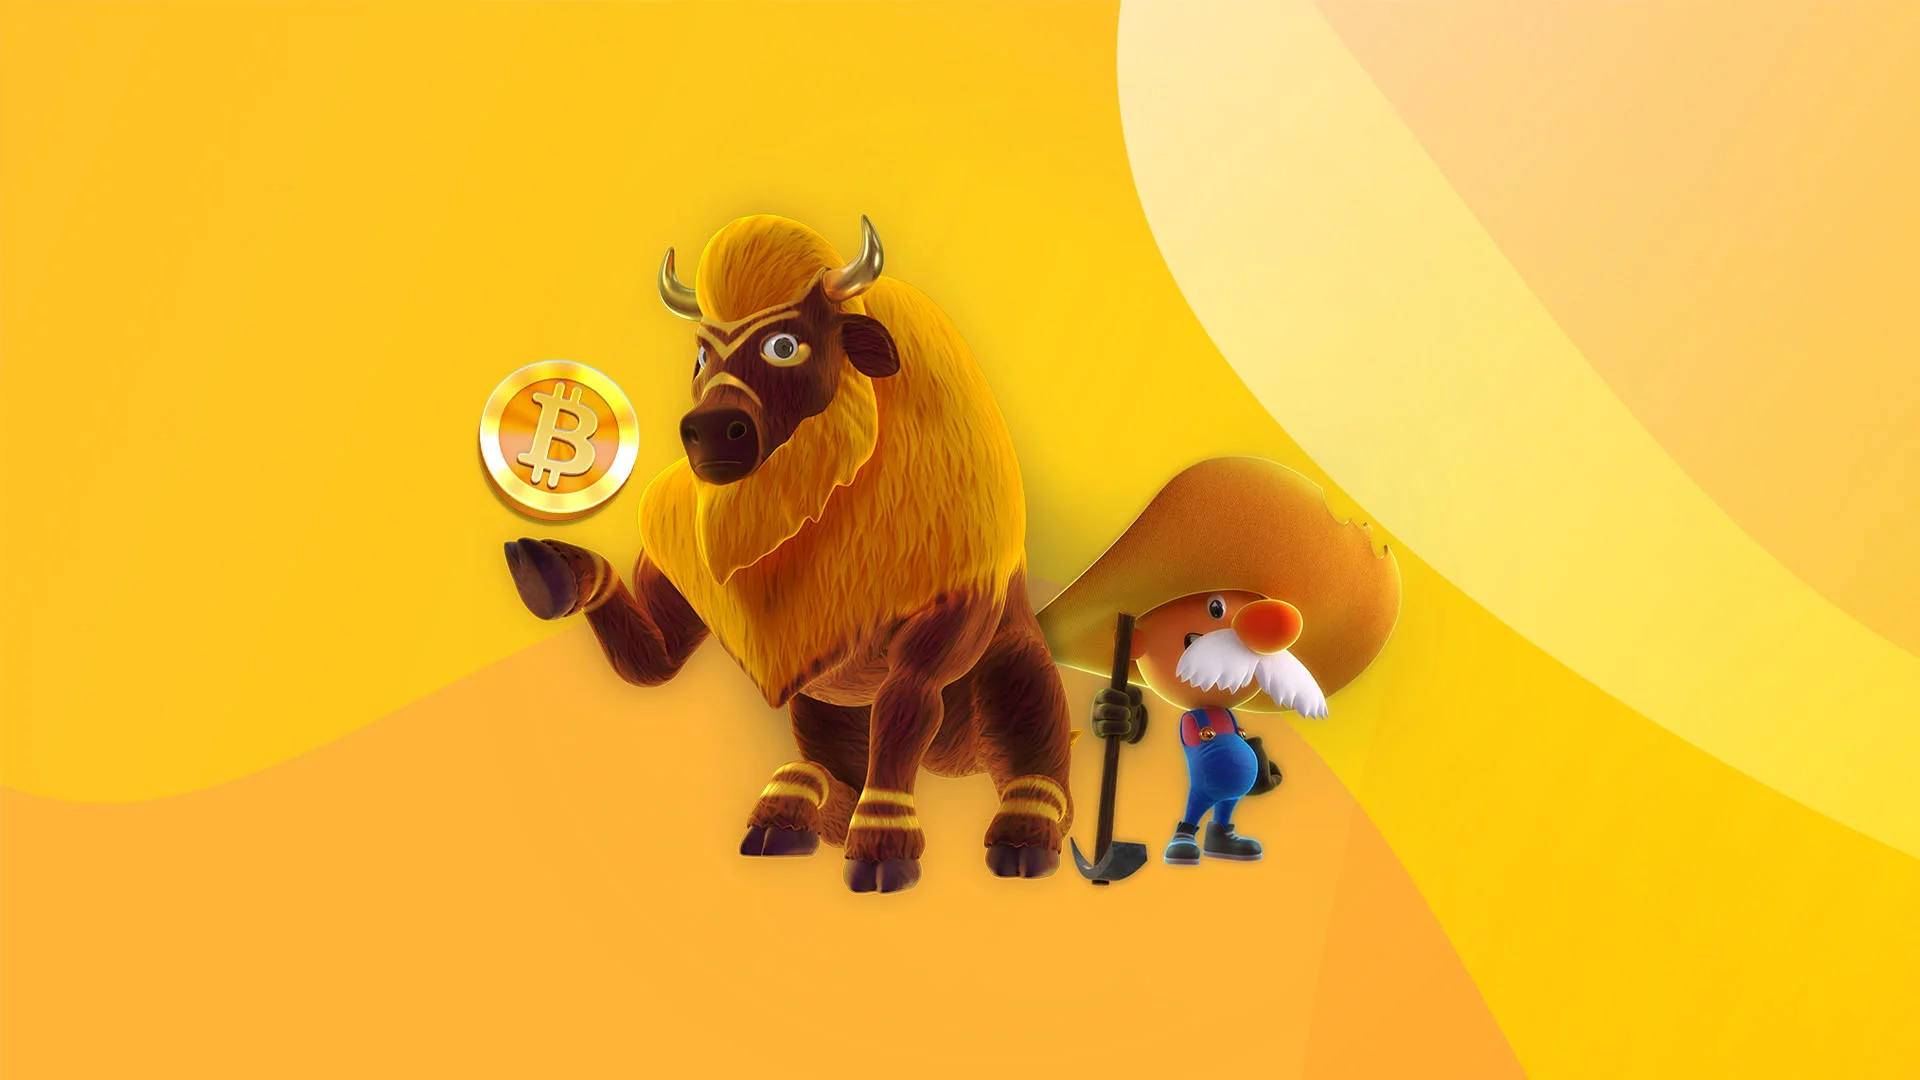 Characters from SlotsLV slots games, such as a Golden Buffalo and Gold Rush Gus, stand in front of a yellow background, with the buffalo holding a gold Bitcoin.